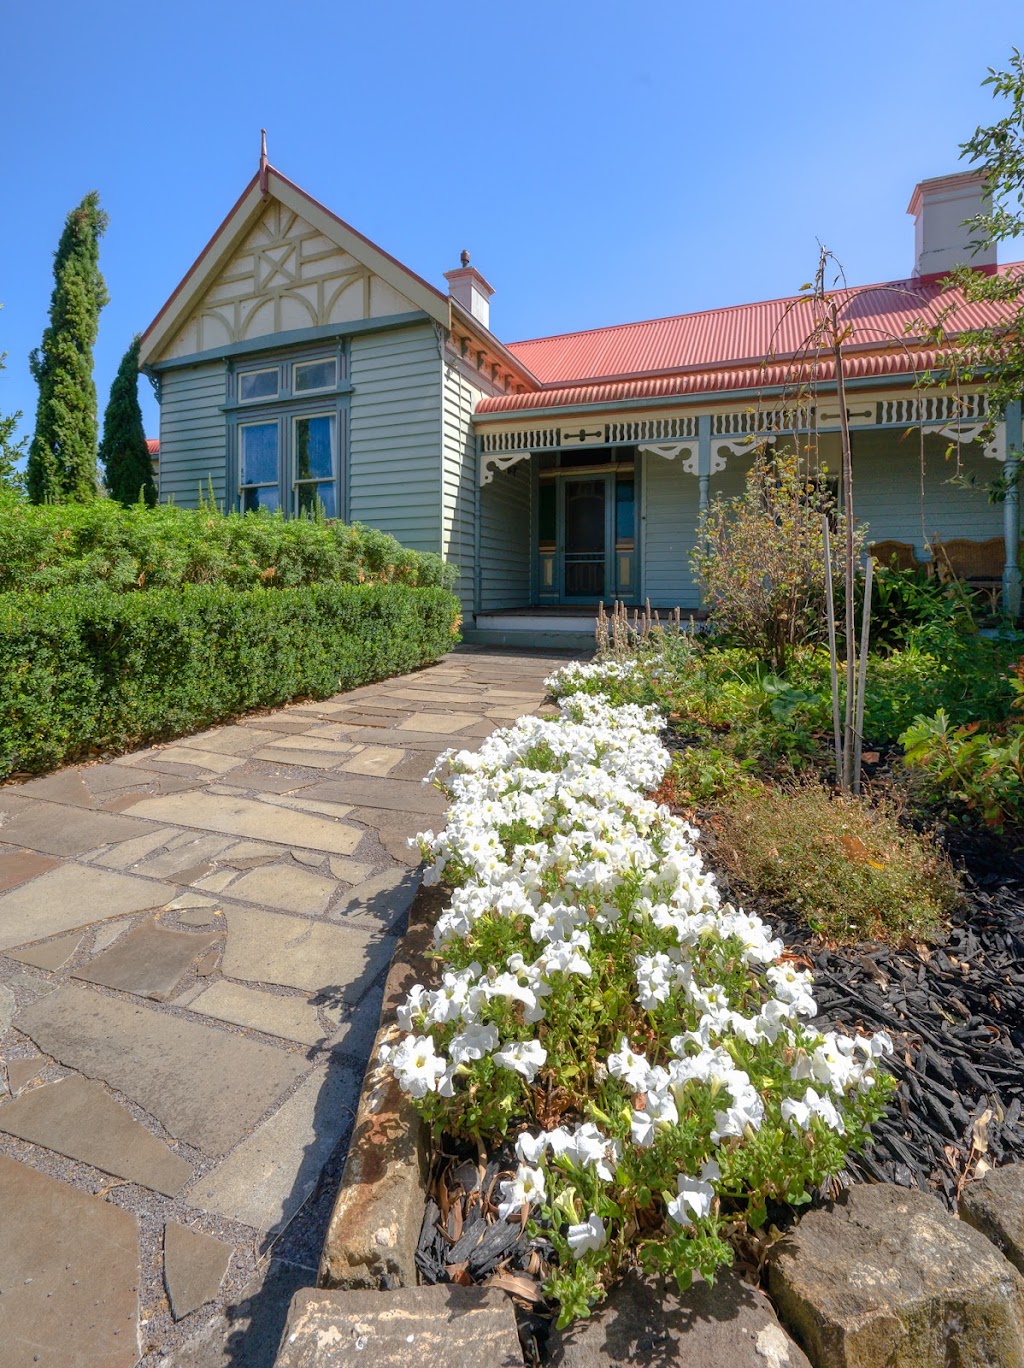 Stone Keepers Run | lodging | 200 Tooram Rd, Allansford VIC 3277, Australia | 0438052675 OR +61 438 052 675